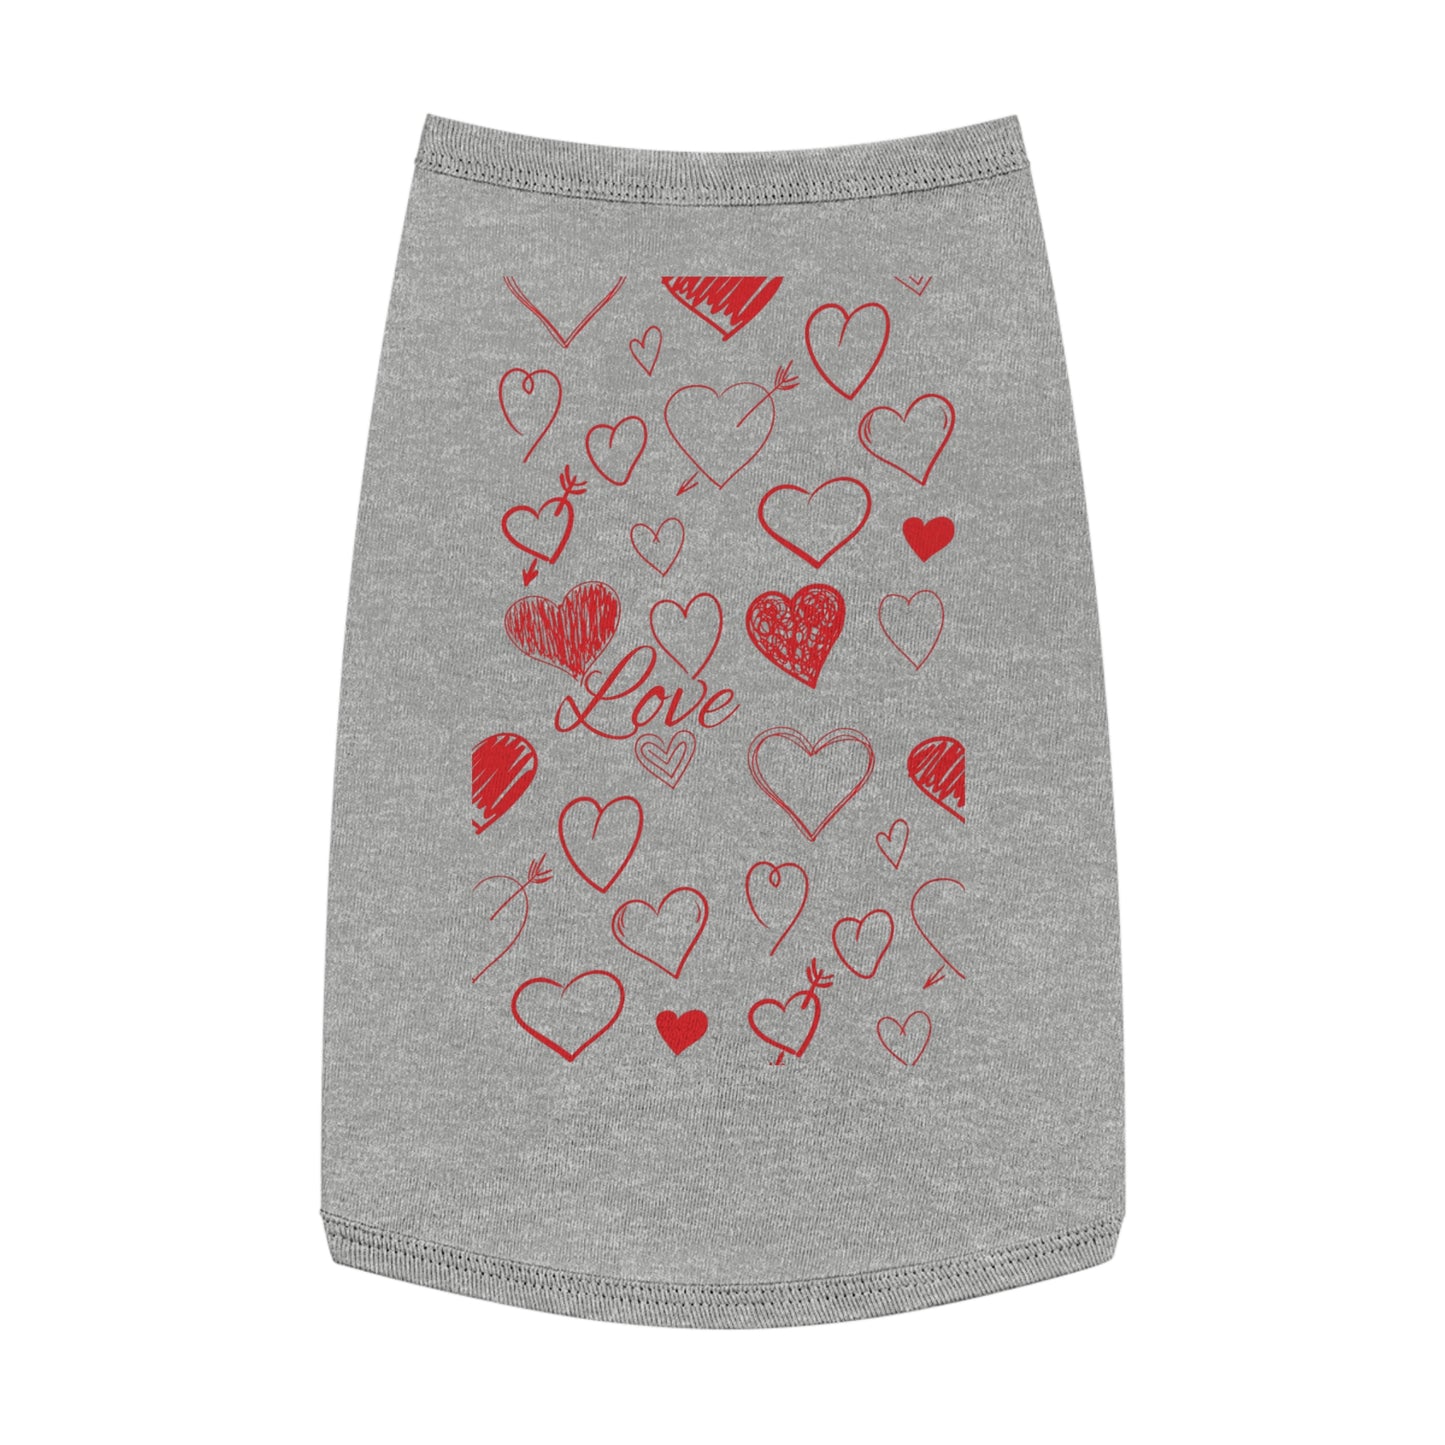 Red Hearts Pet Tank Top.